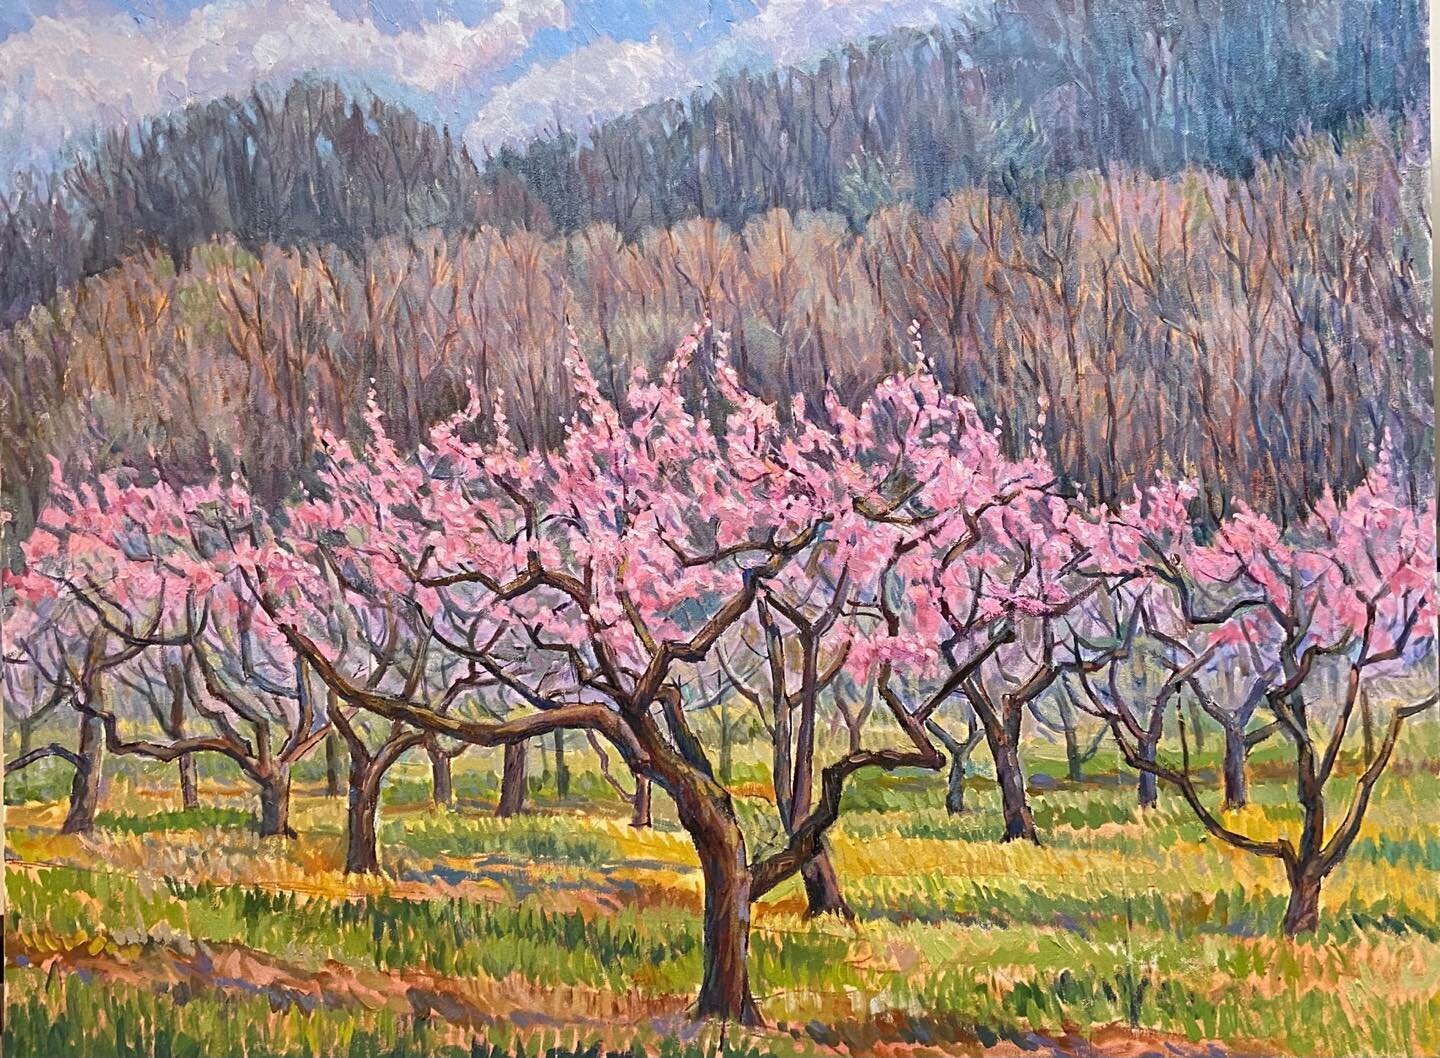 In April this apple orchard a couple miles from my home will come alive with pink blossoms. Here&rsquo;s my subjective interpretation of that Wonderful place I like to visit.  Oil on canvas 30 x 40&rdquo;.